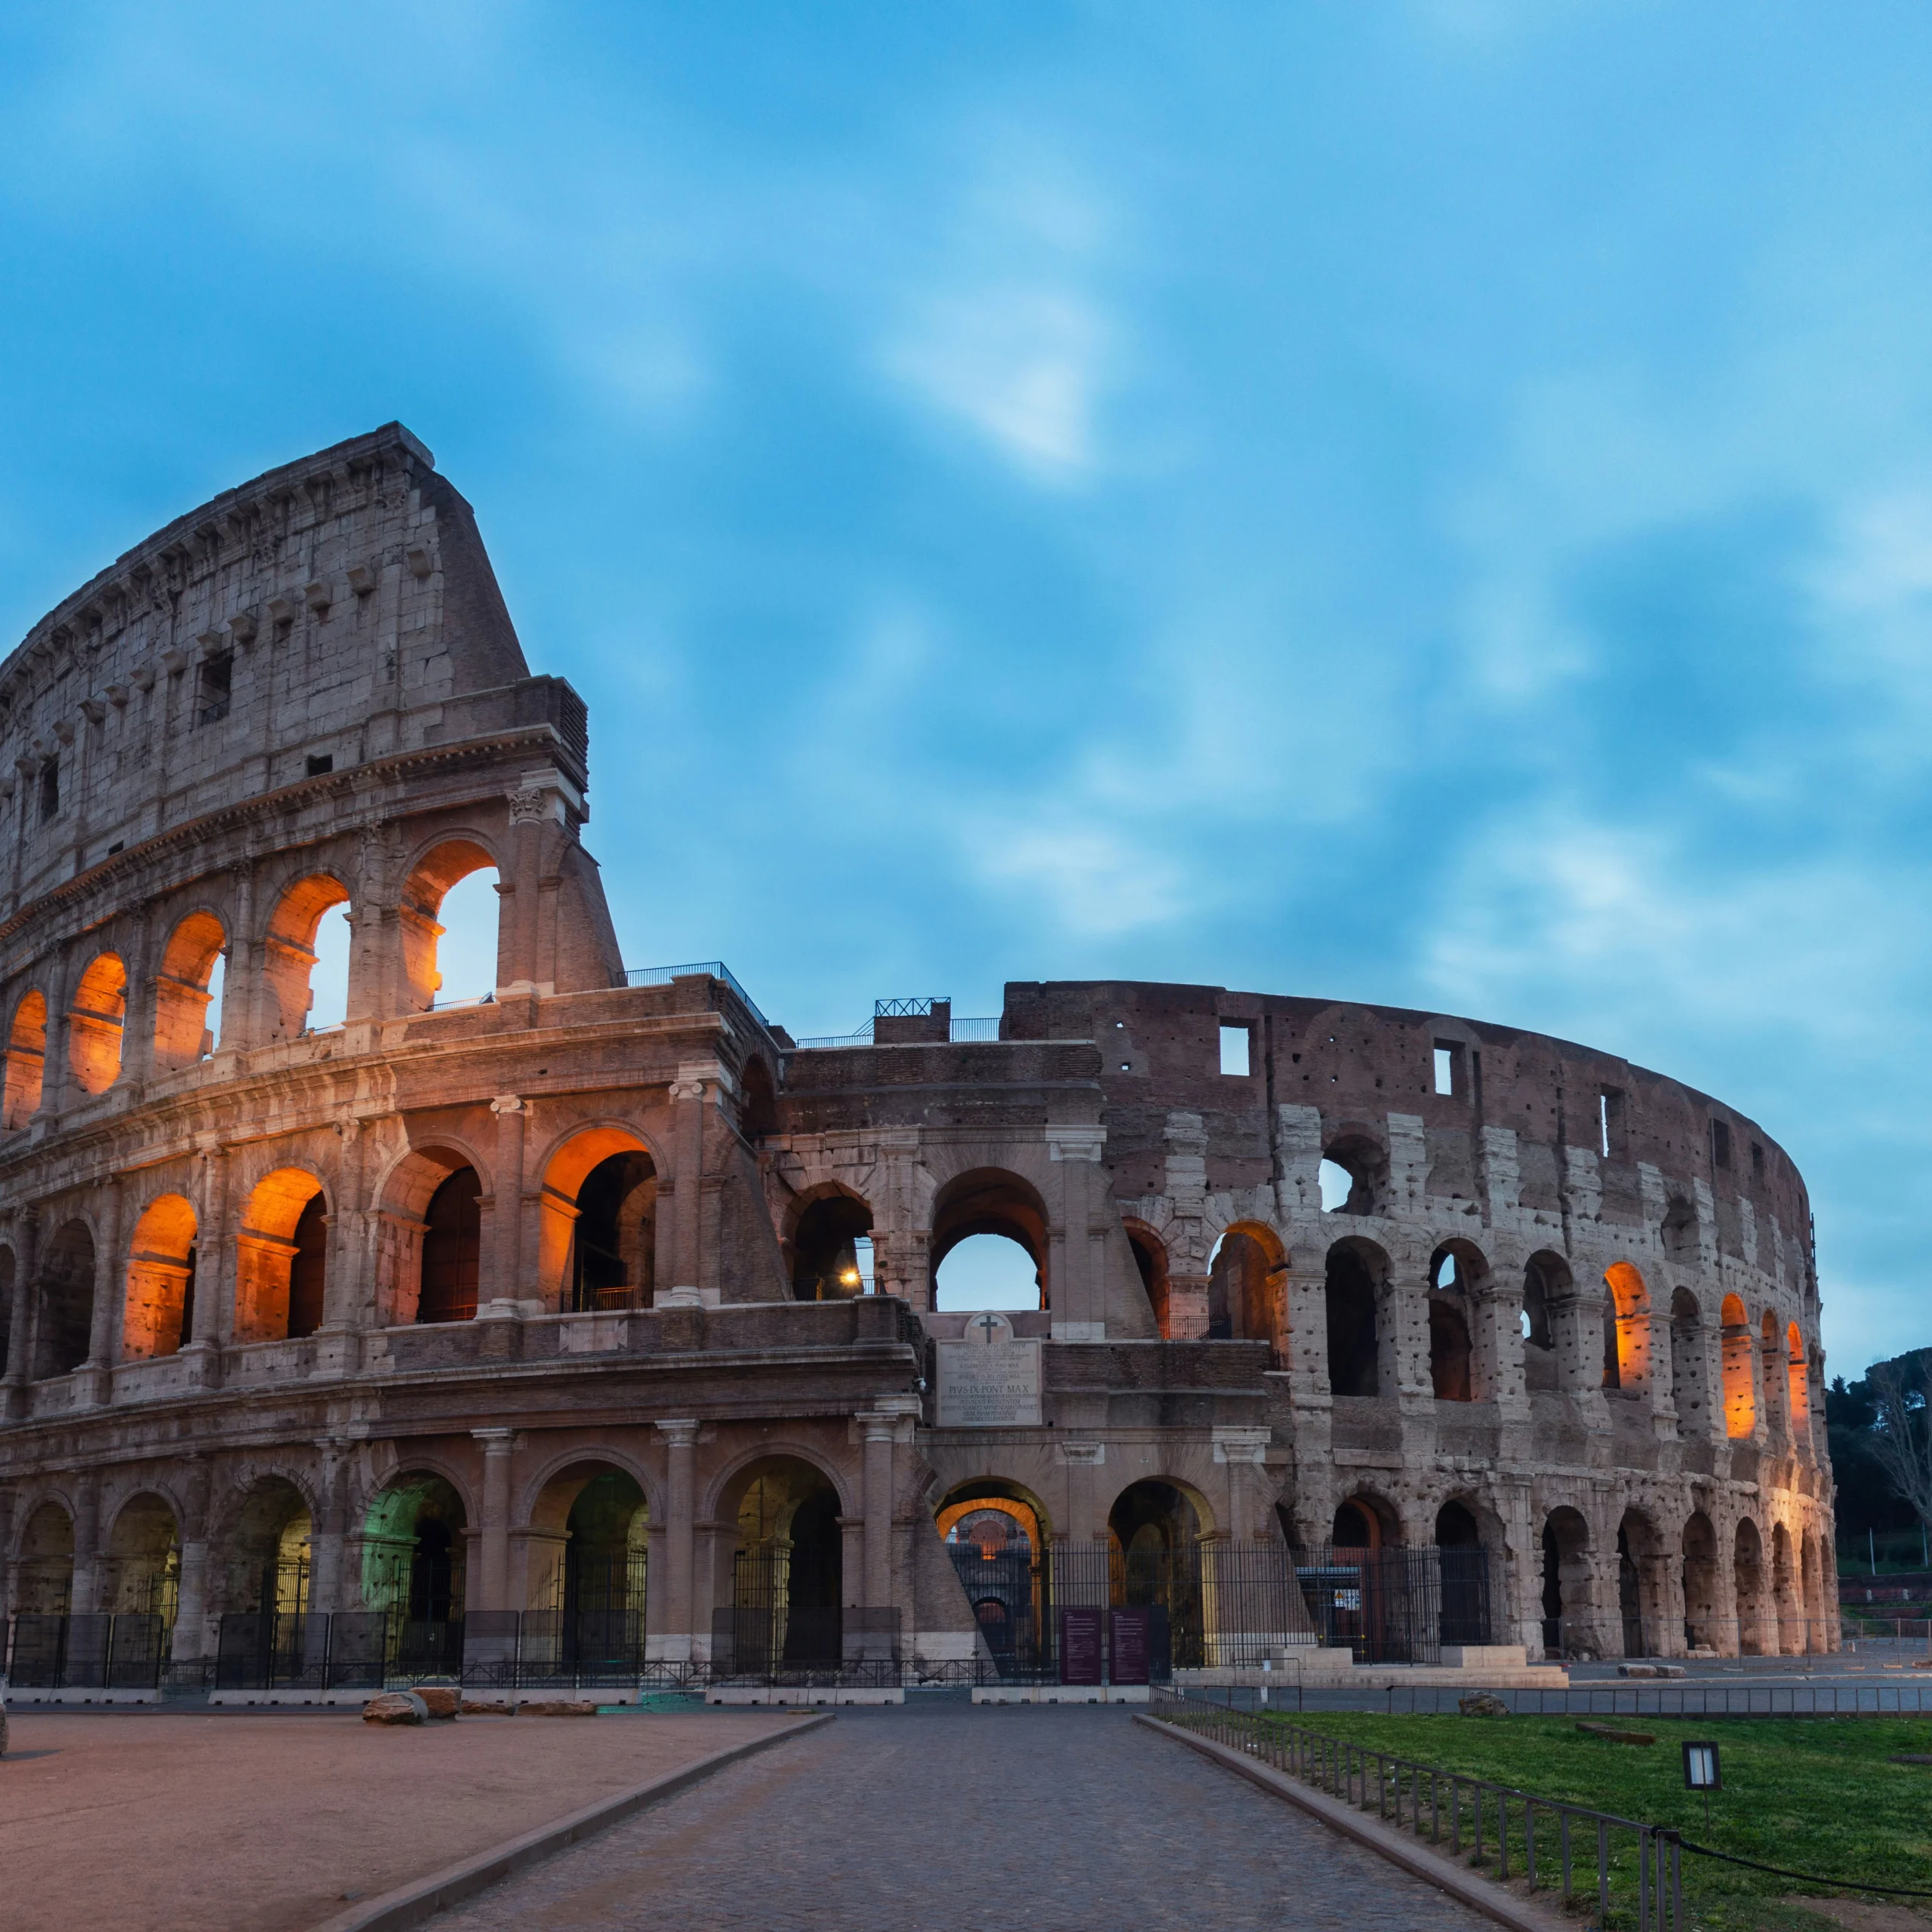 Are Colosseum Skip the Line Tickets More Expensive?